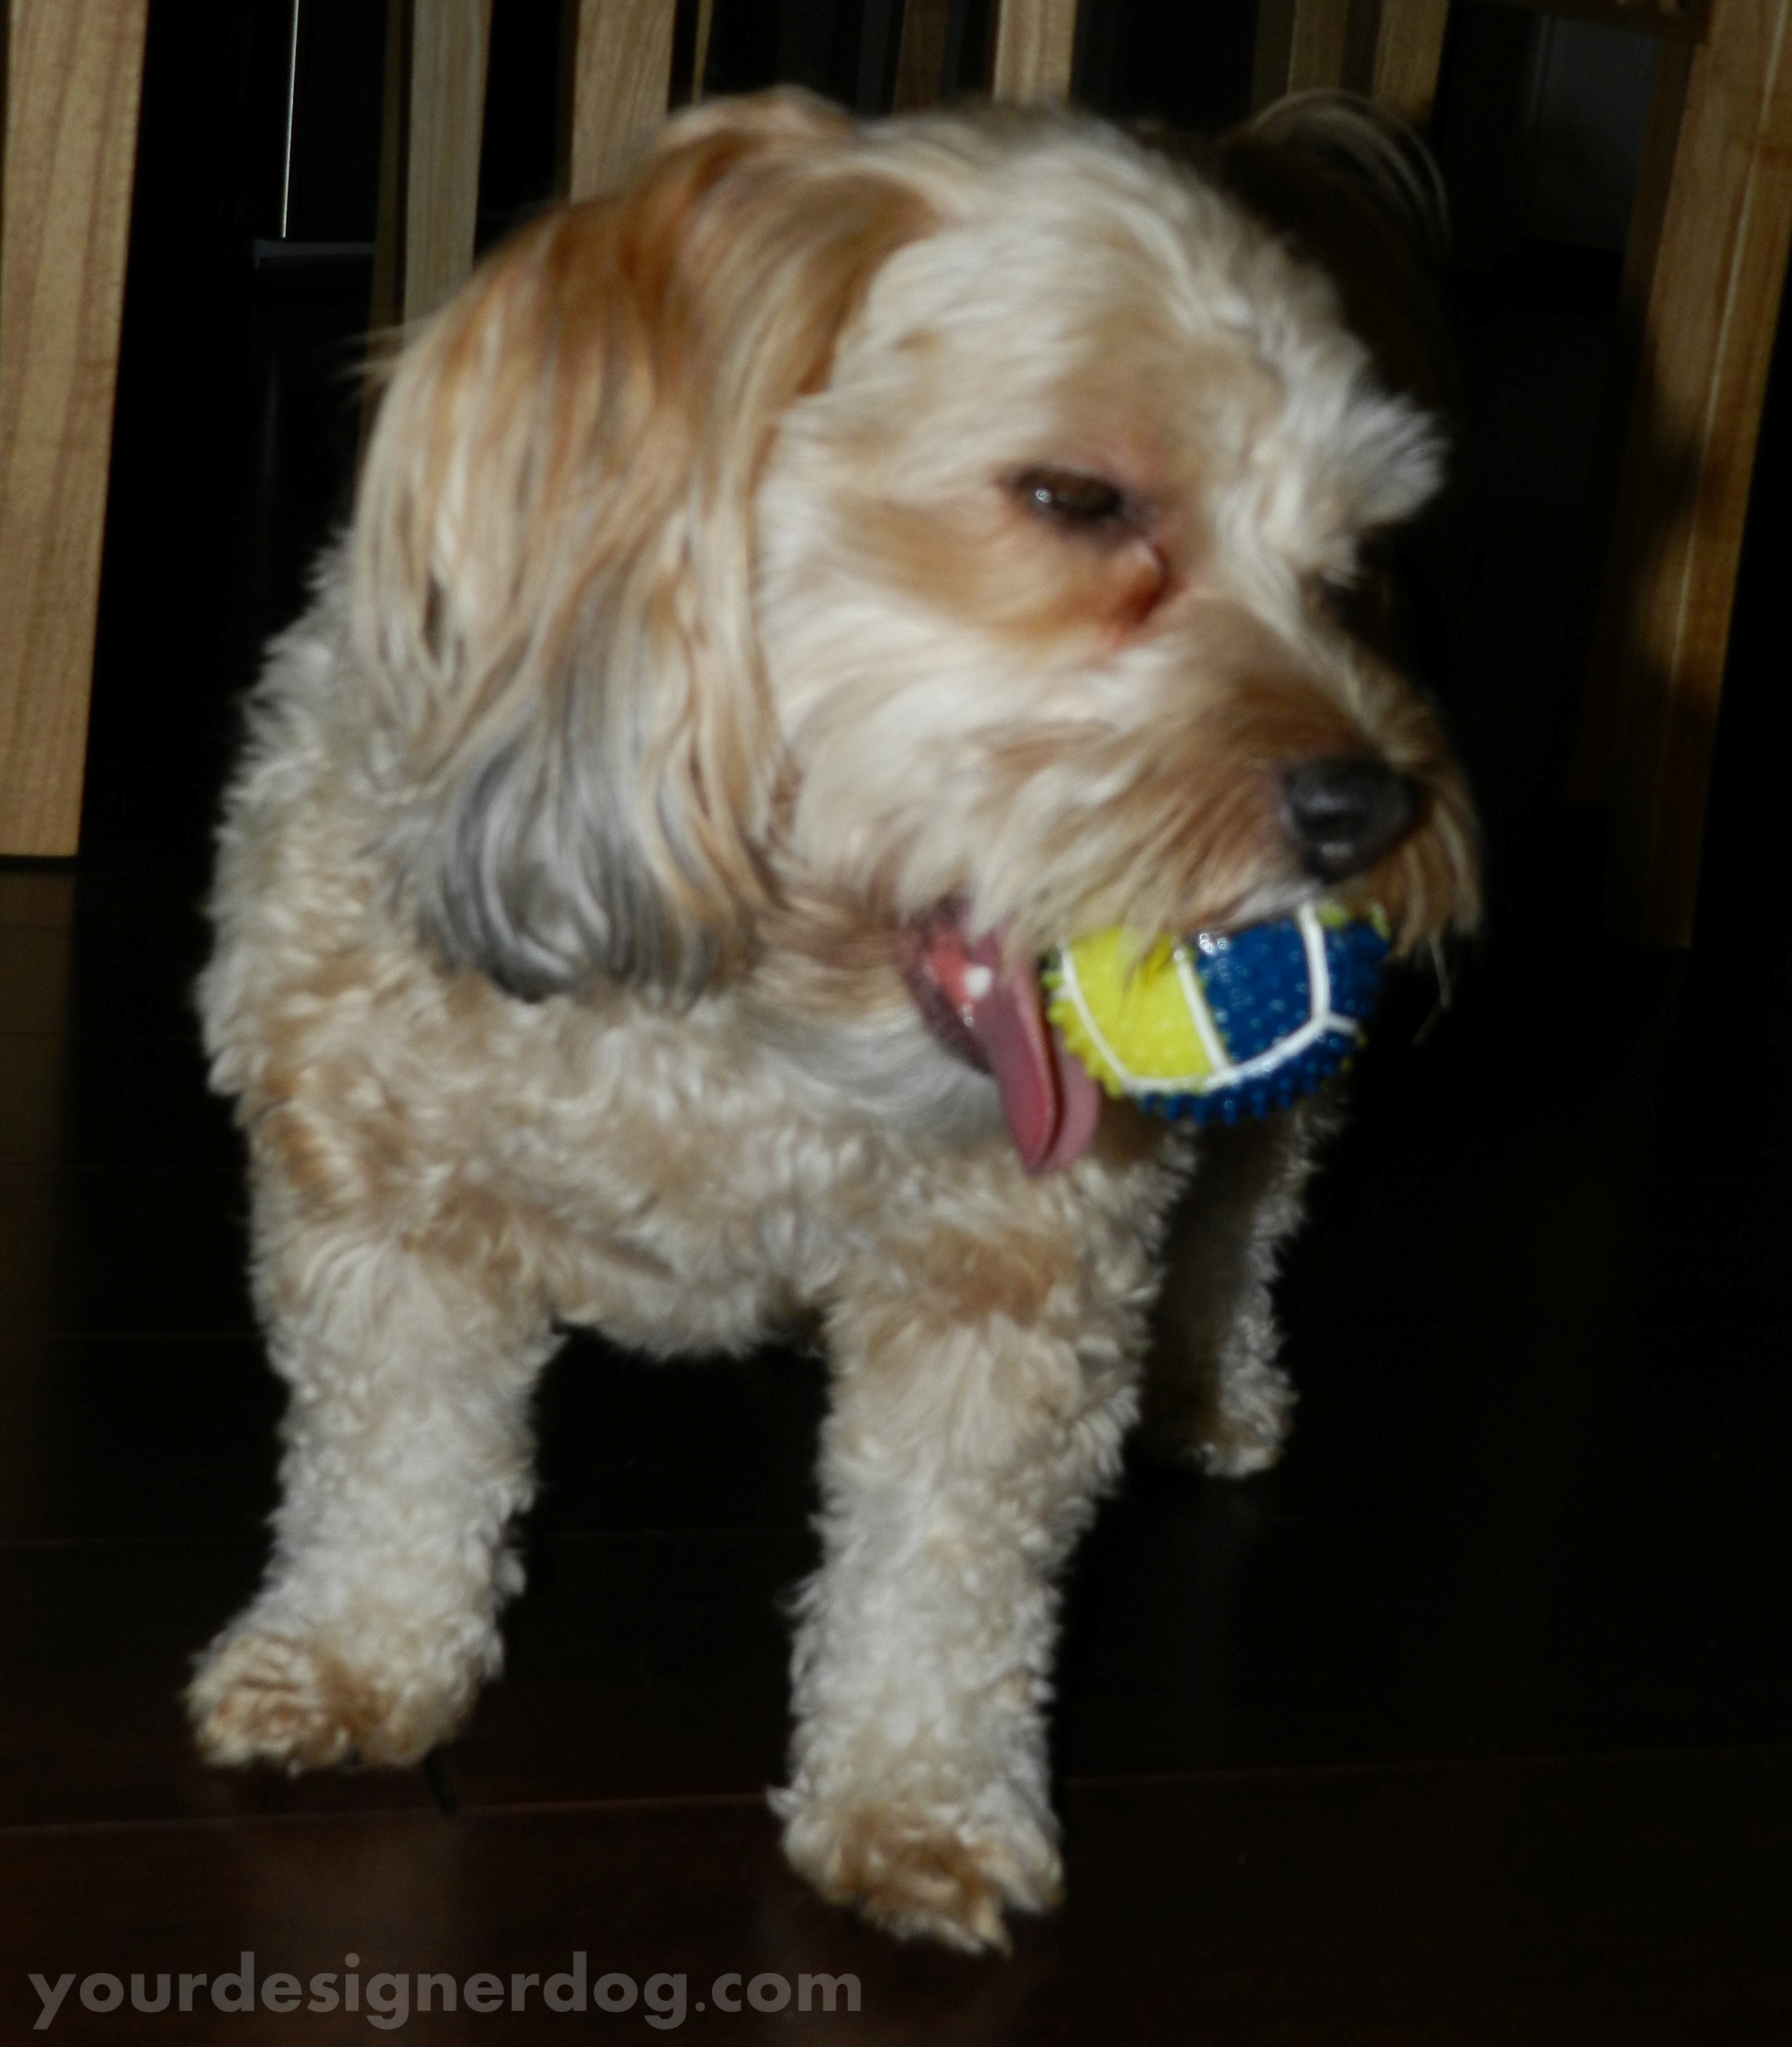 dogs, designer dogs, yorkipoo, yorkie poo, dog toy, squeaky ball